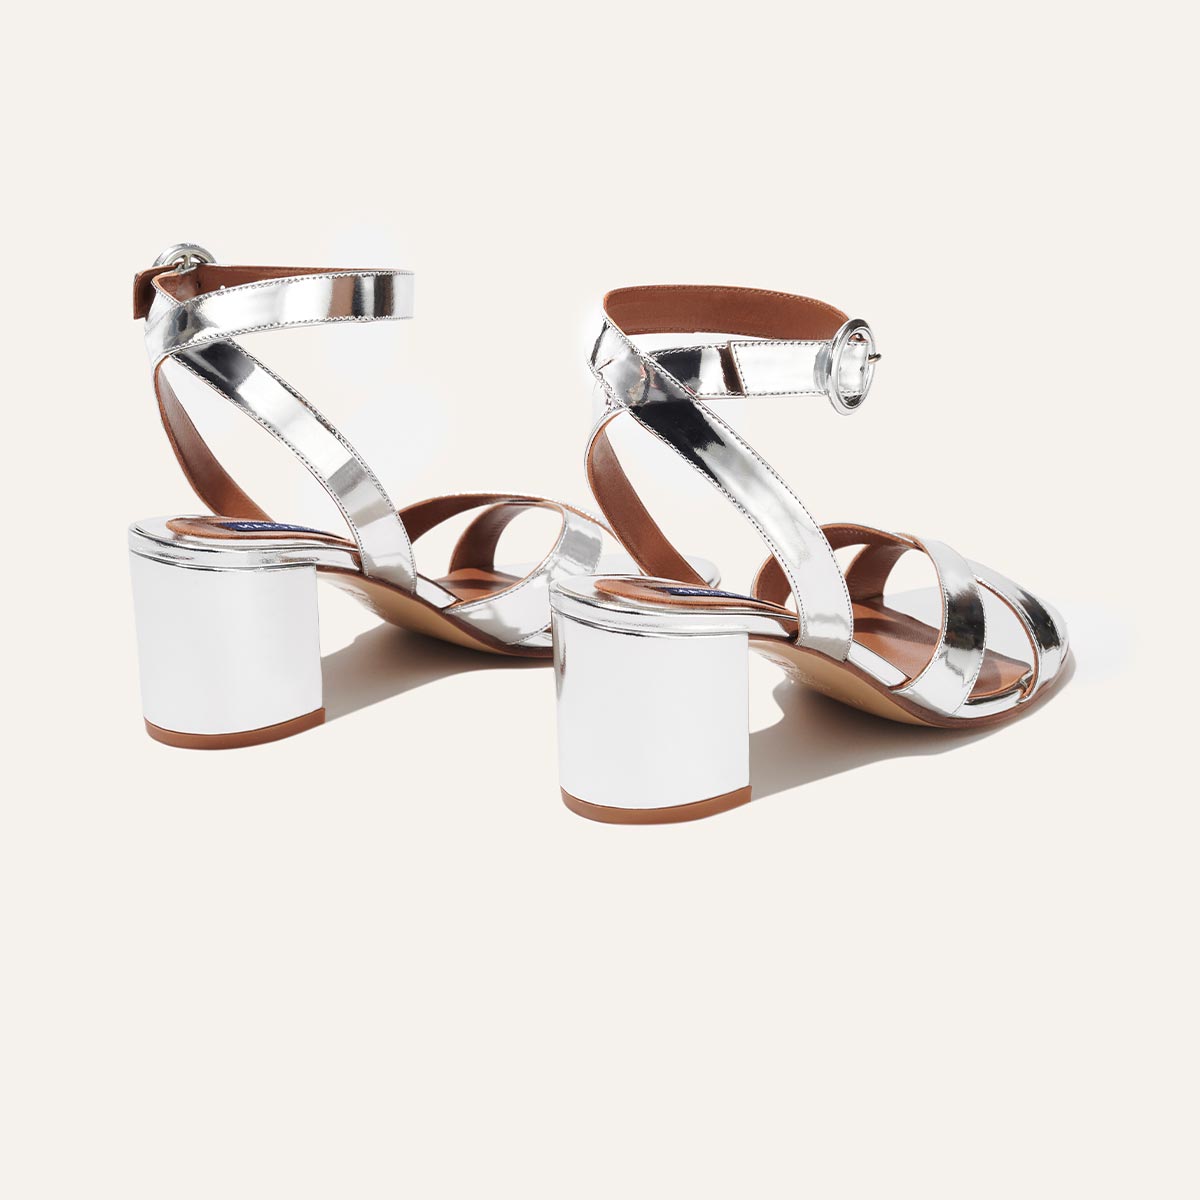 The City Sandal in Silver Mirror